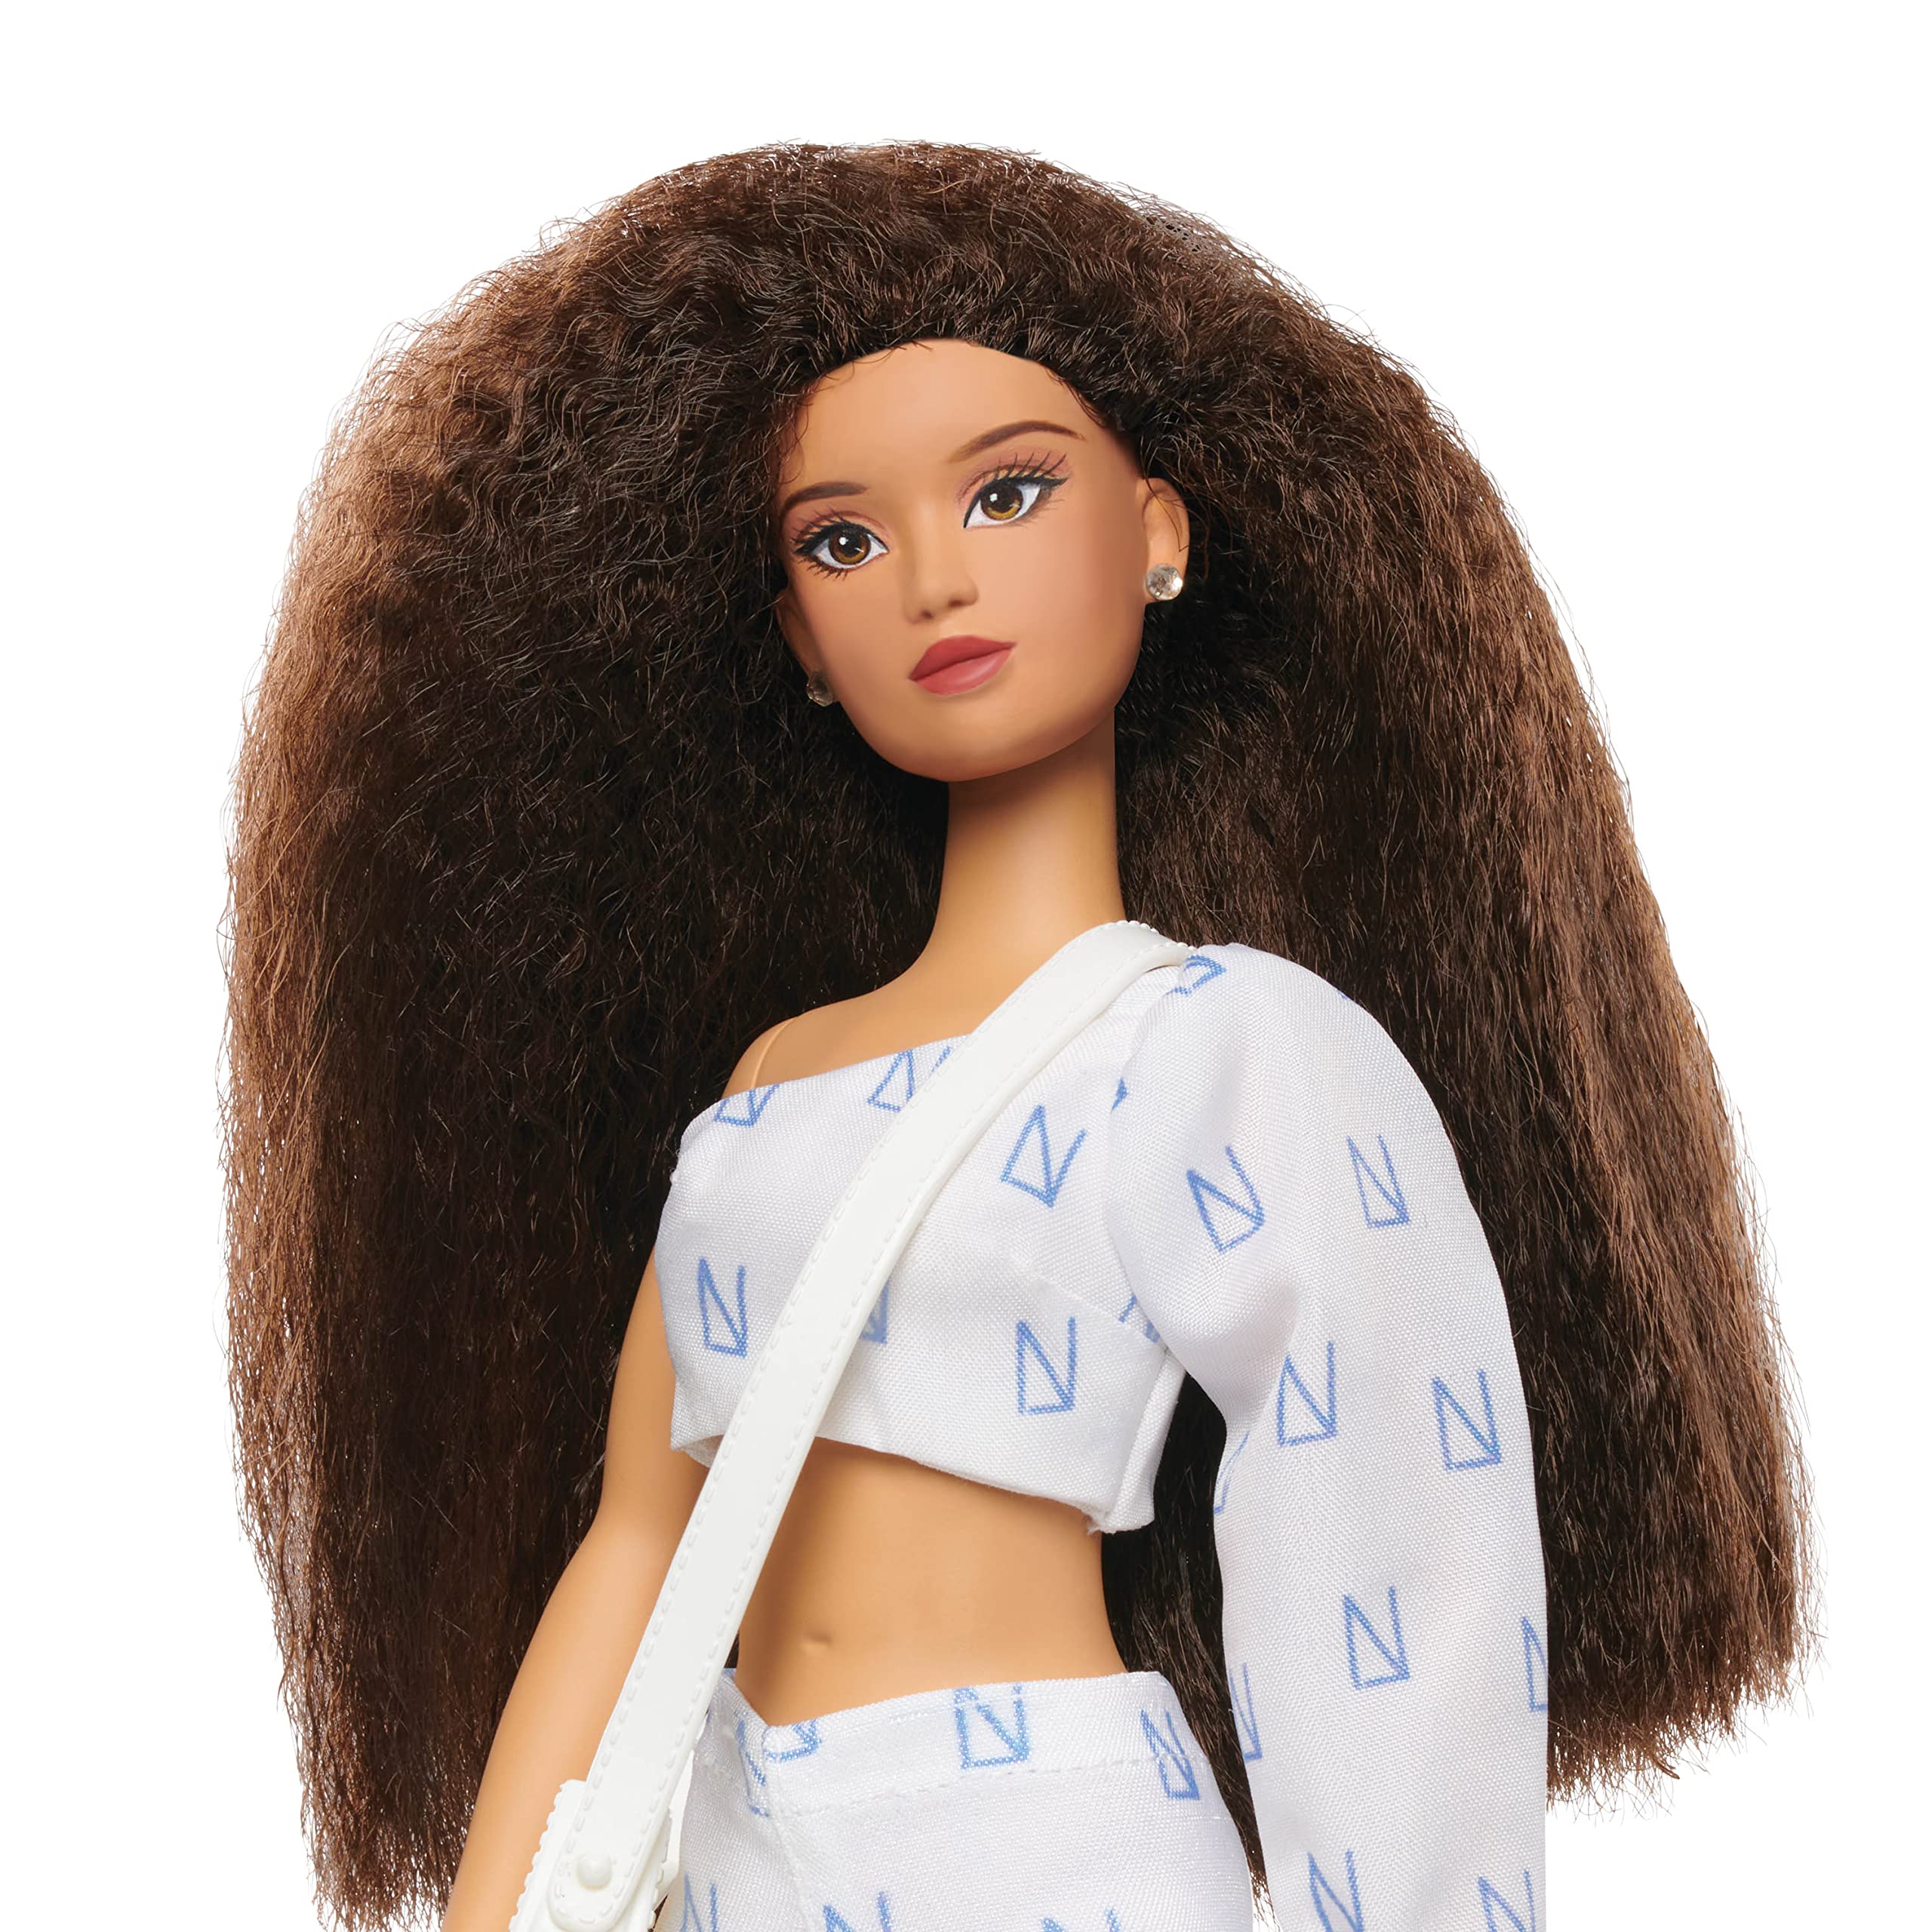 Purpose Toys Naturalistas 11.5-inch Fashion Doll and Accessories Kelsey, 4B Textured Hair, Light Brown Skin Tone Designed and Developed